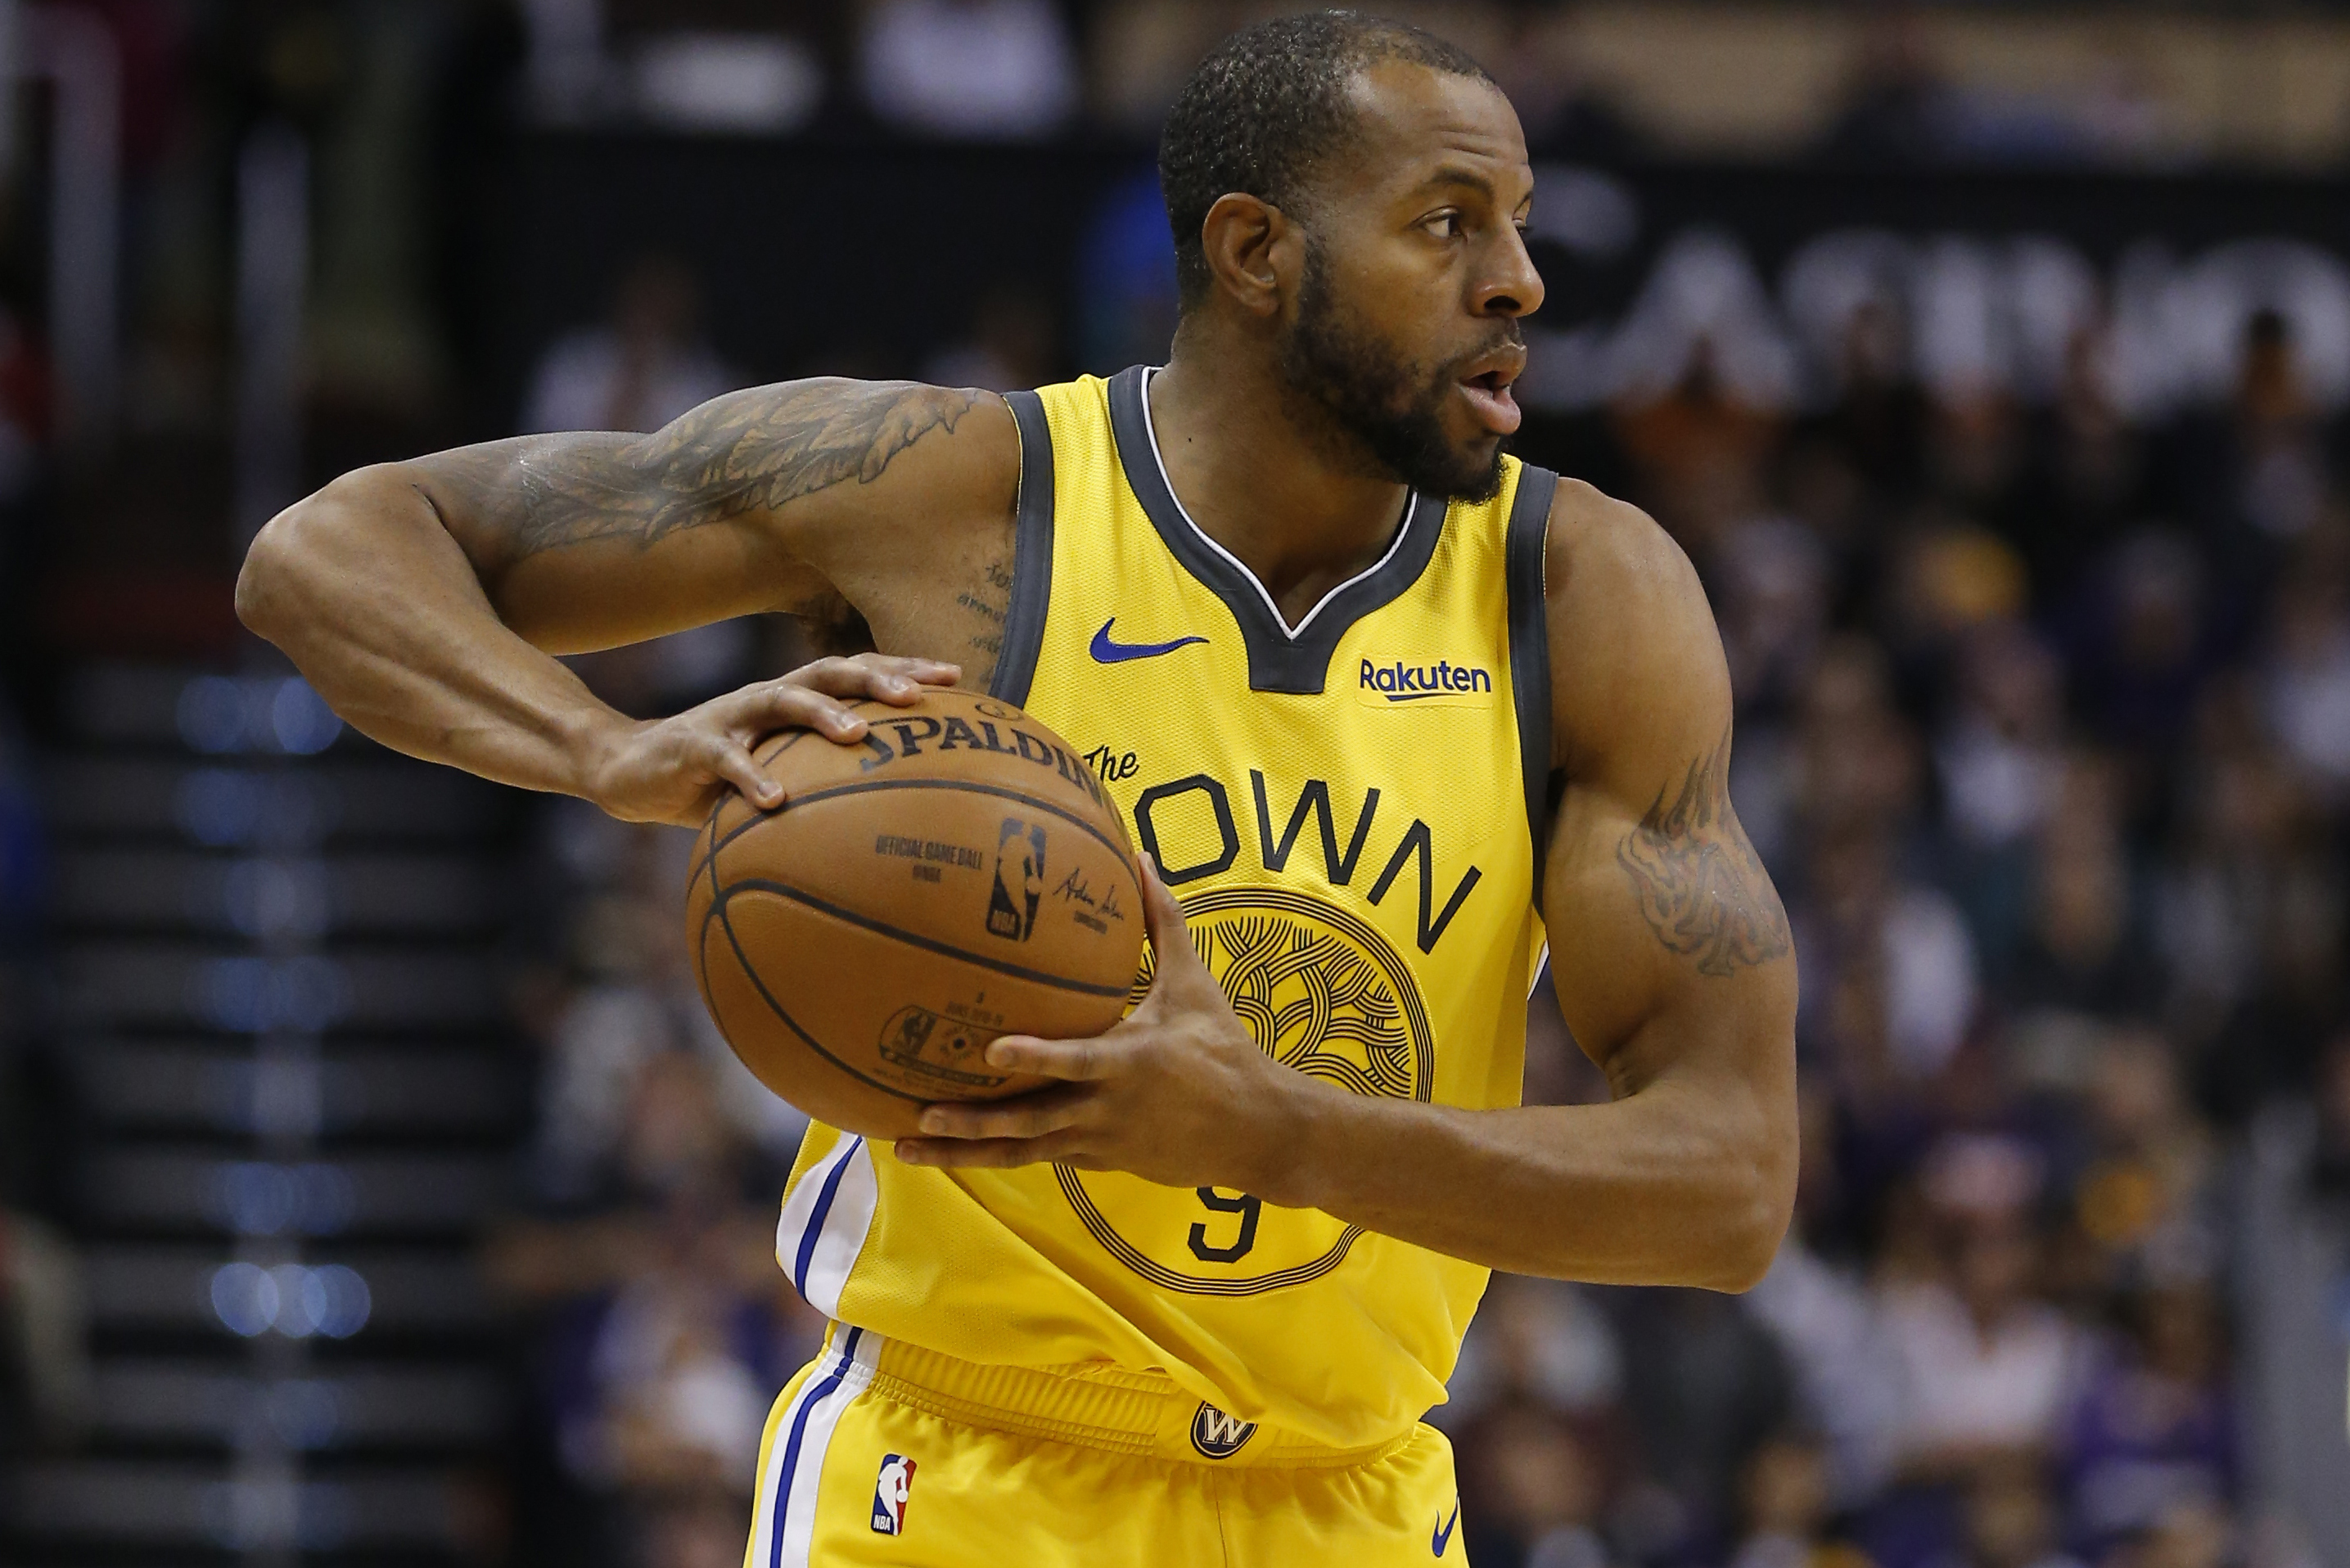 Nba Rumors Latest On Andre Iguodala Trade Buzz Ryan West S Lakers Departure Bleacher Report Latest News Videos And Highlights